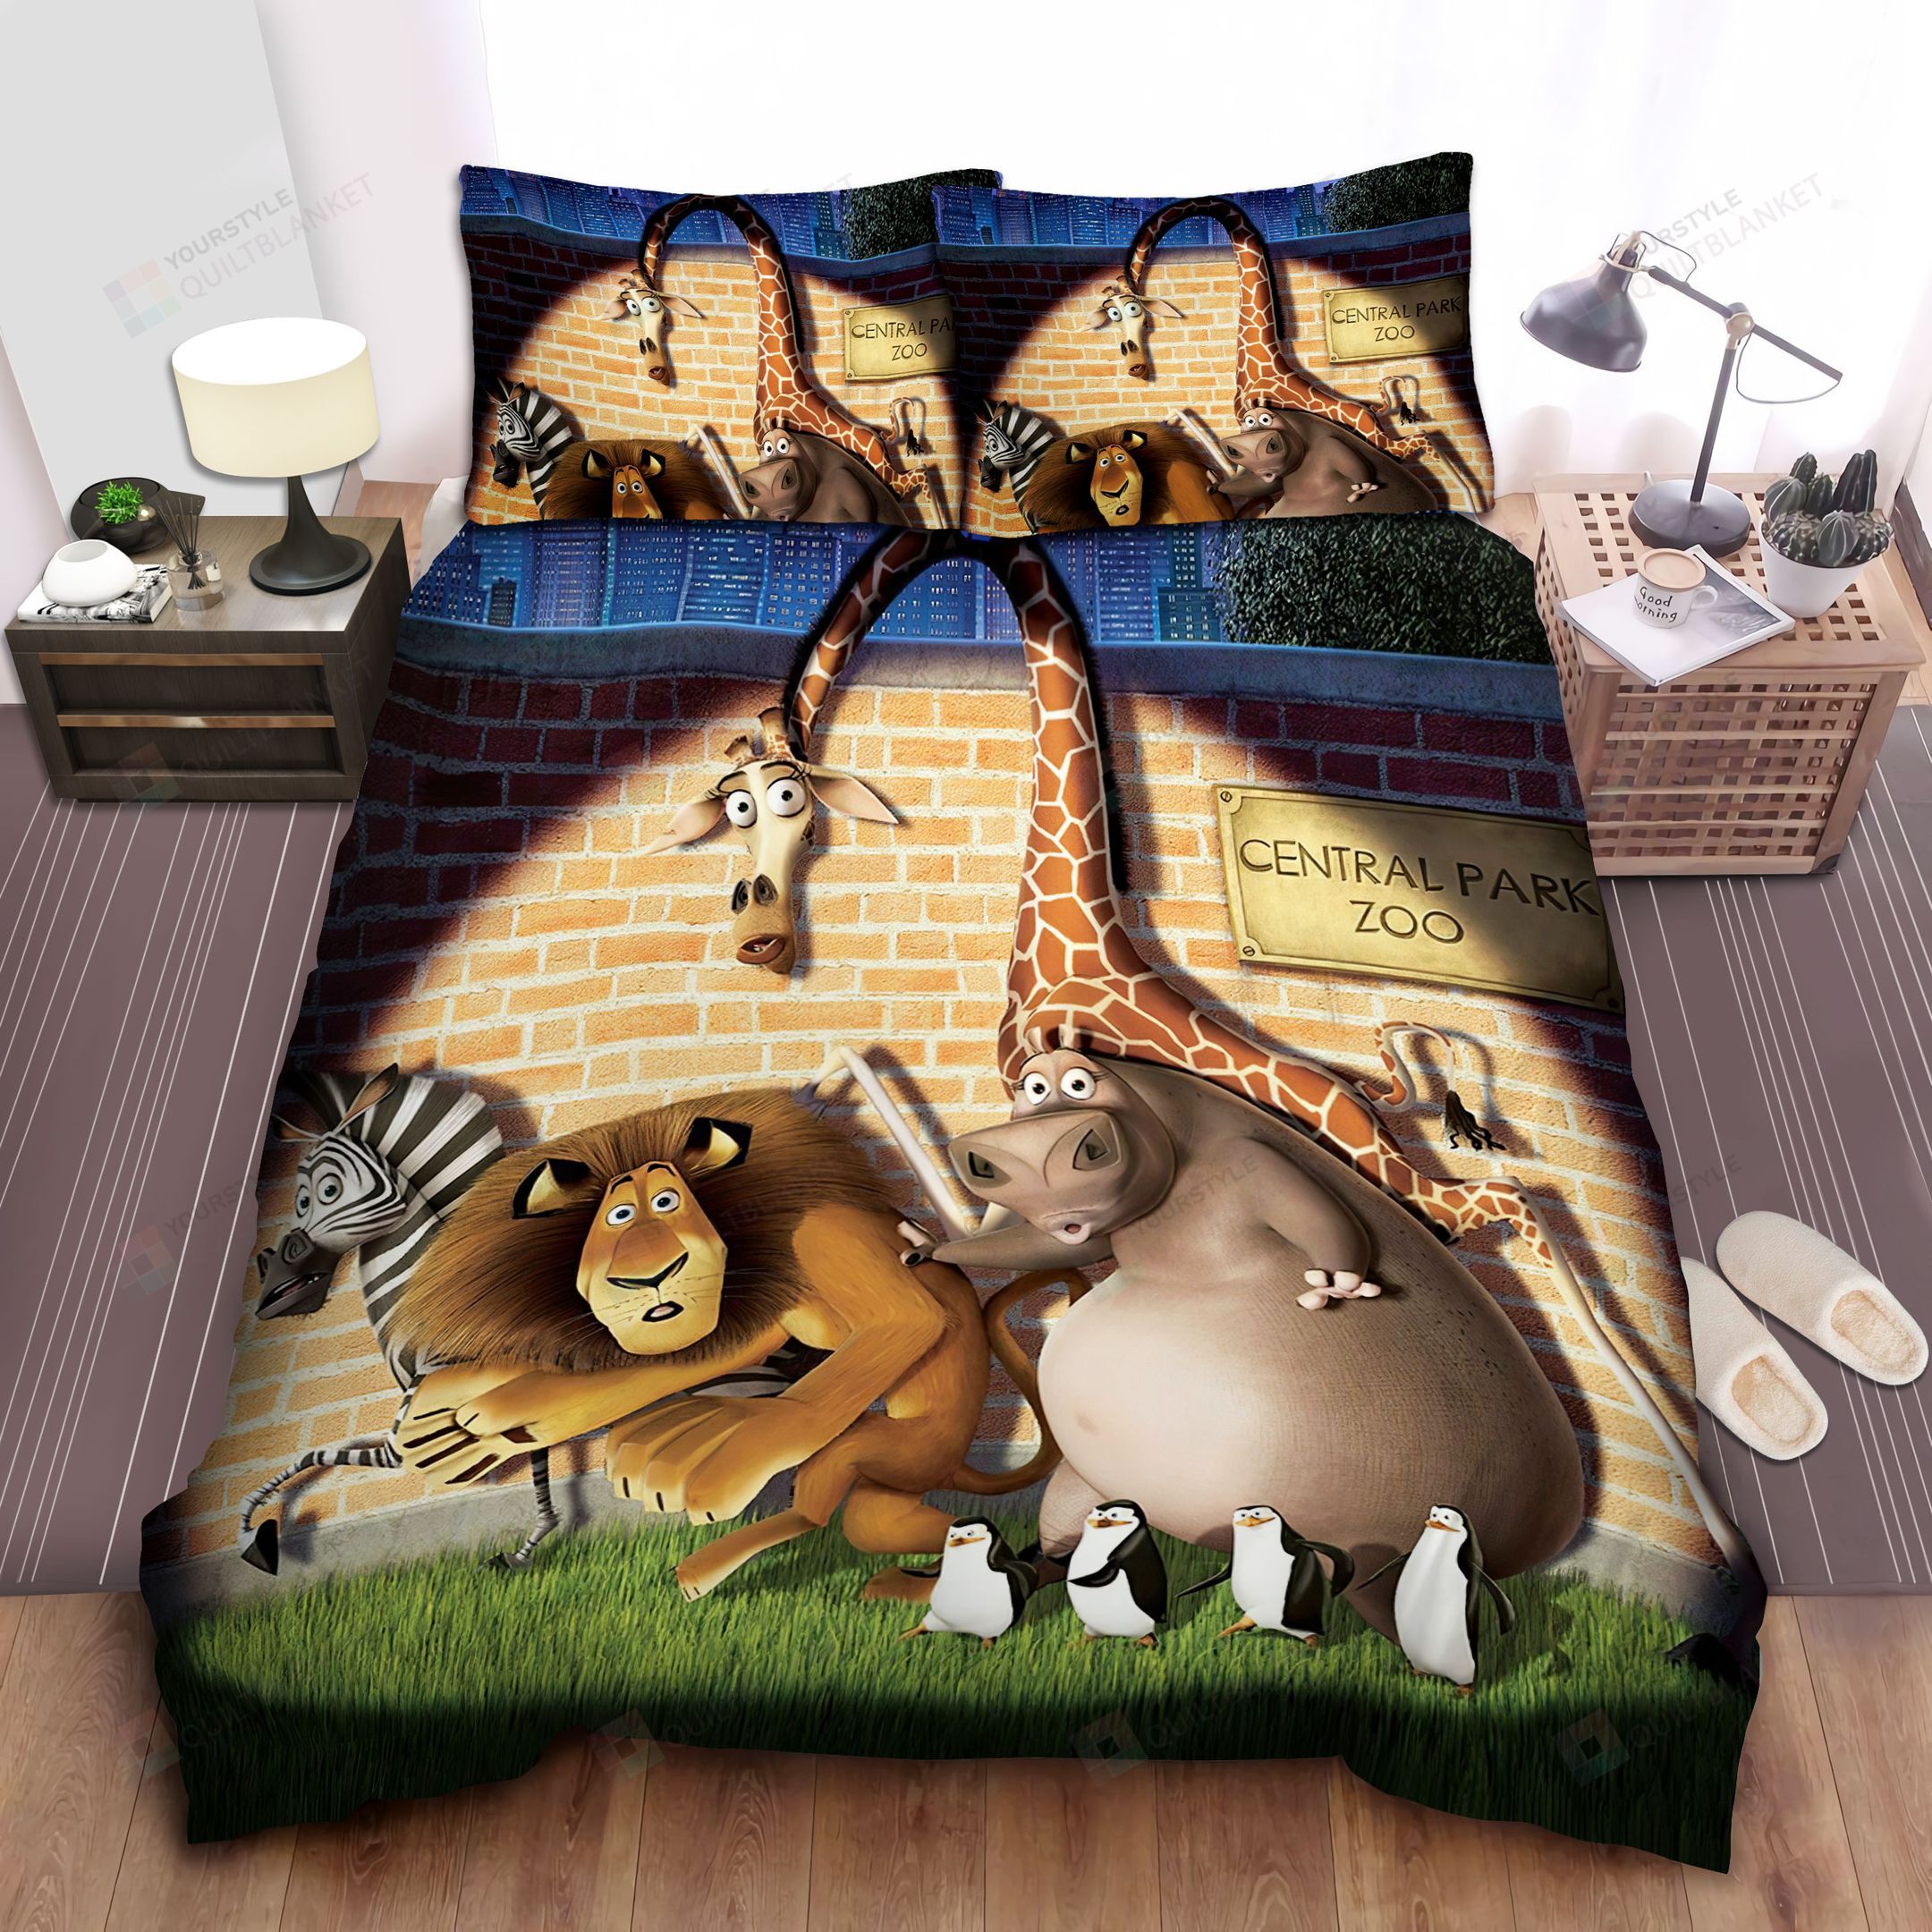 Madagascar Main Characters Sneak In Central Park Zoo Bed Sheets Spread Comforter Duvet Cover Bedding Sets